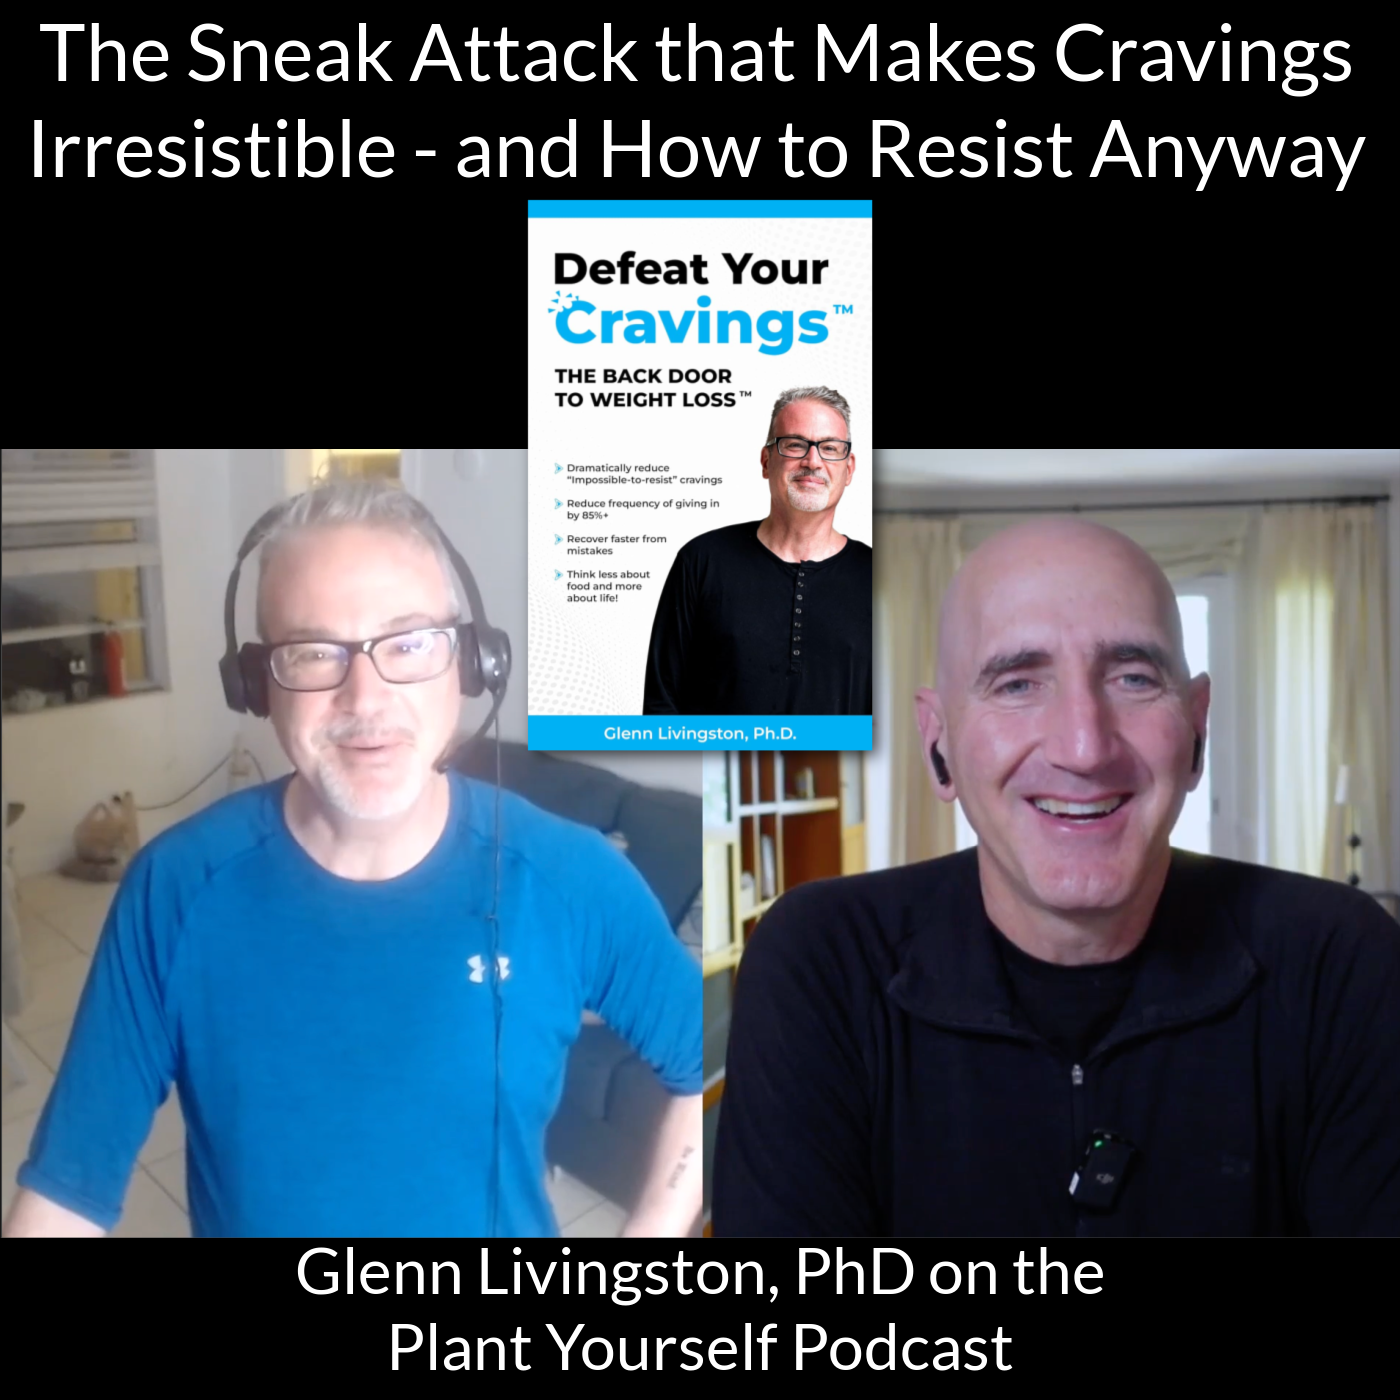 The Sneak Attack that Makes Cravings Irresistible - and How to Resist Anyway: Glenn Livingston, PhD on PYP 576